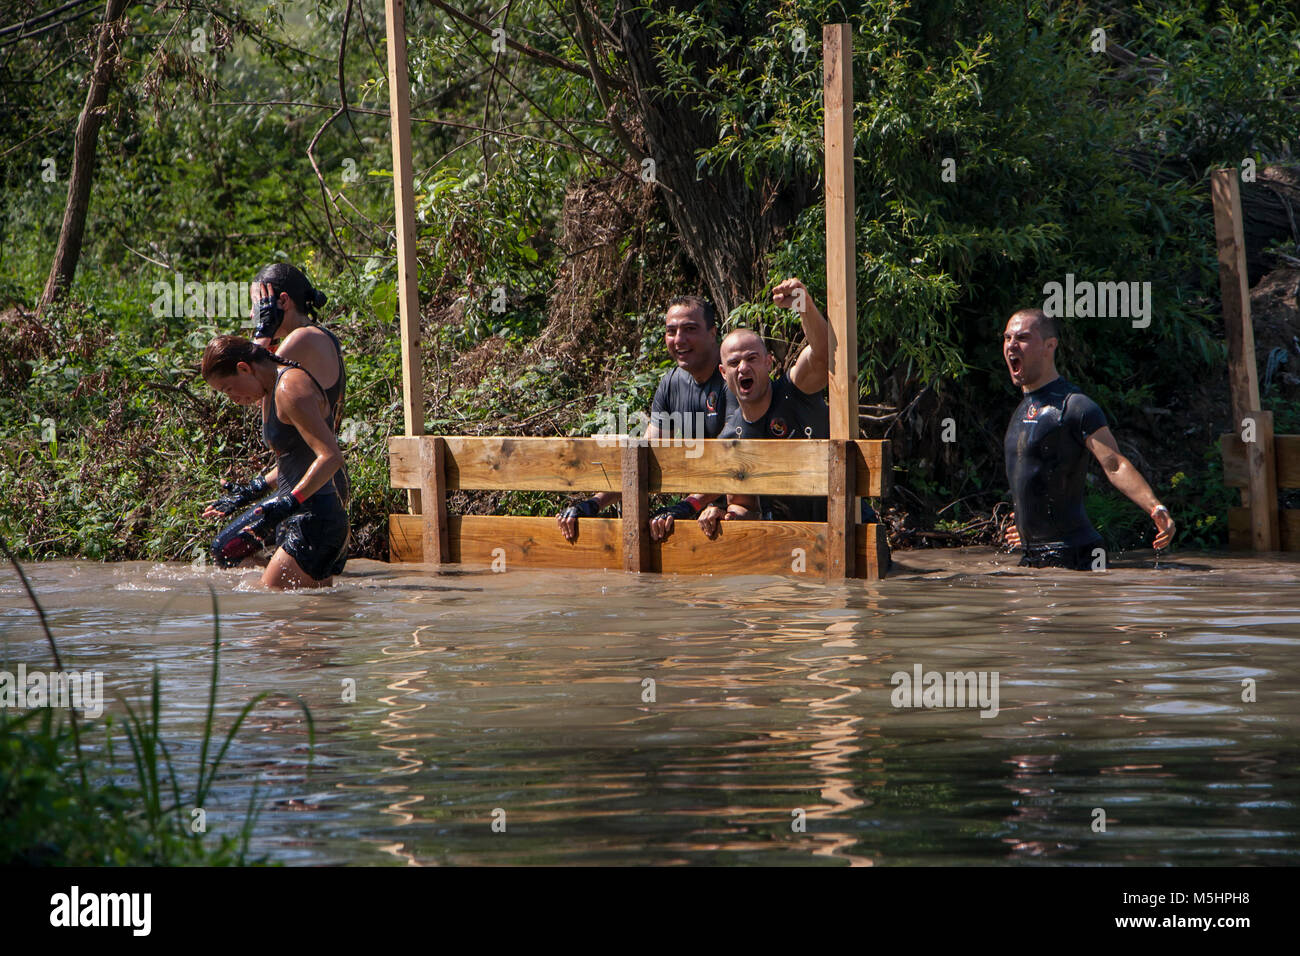 A team of three men and two women crossing a river challenge and having fun at the physical strength competition Legion Run held in Sofia, Bulgaria Stock Photo